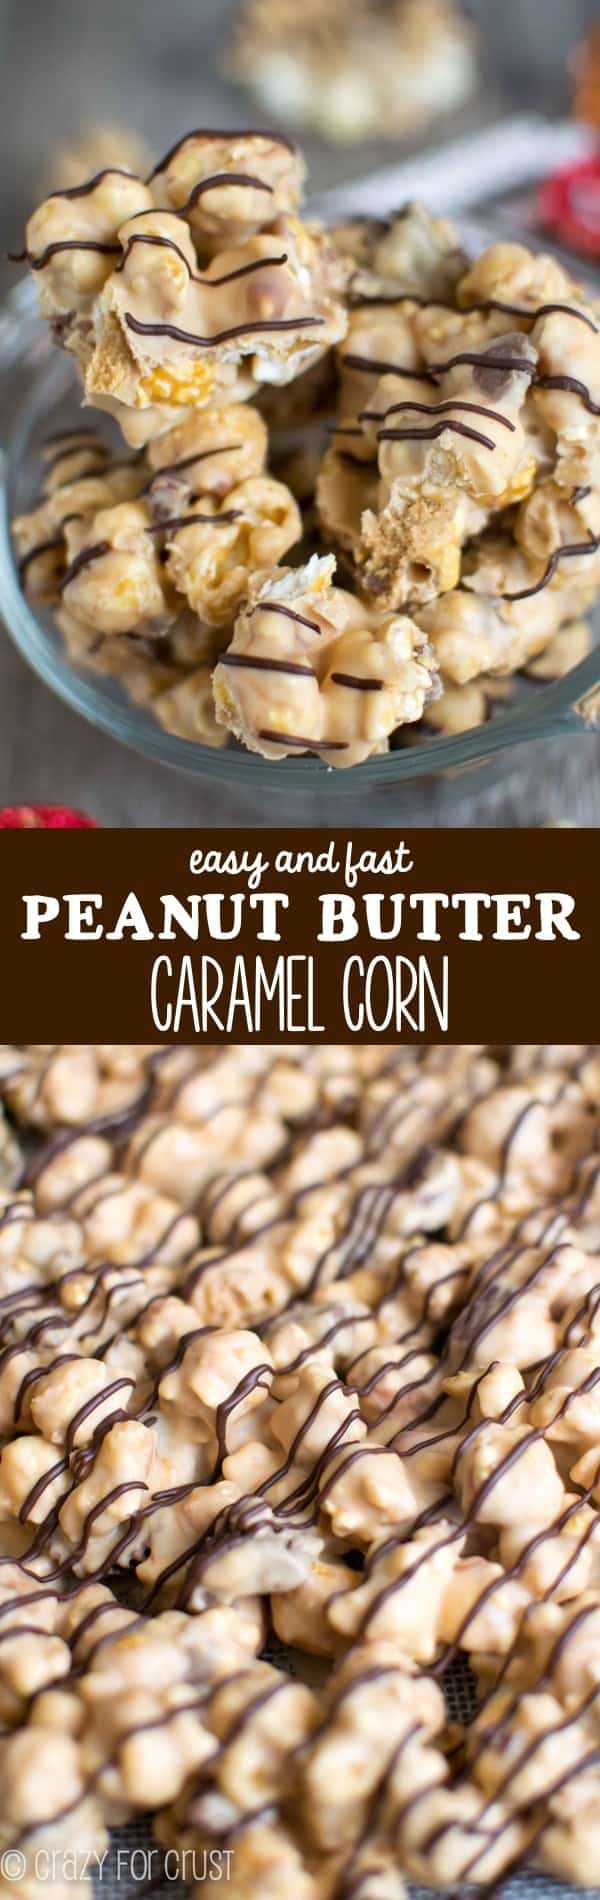 Easy Peanut Butter Caramel Corn - it's the only recipe I'll ever make again!